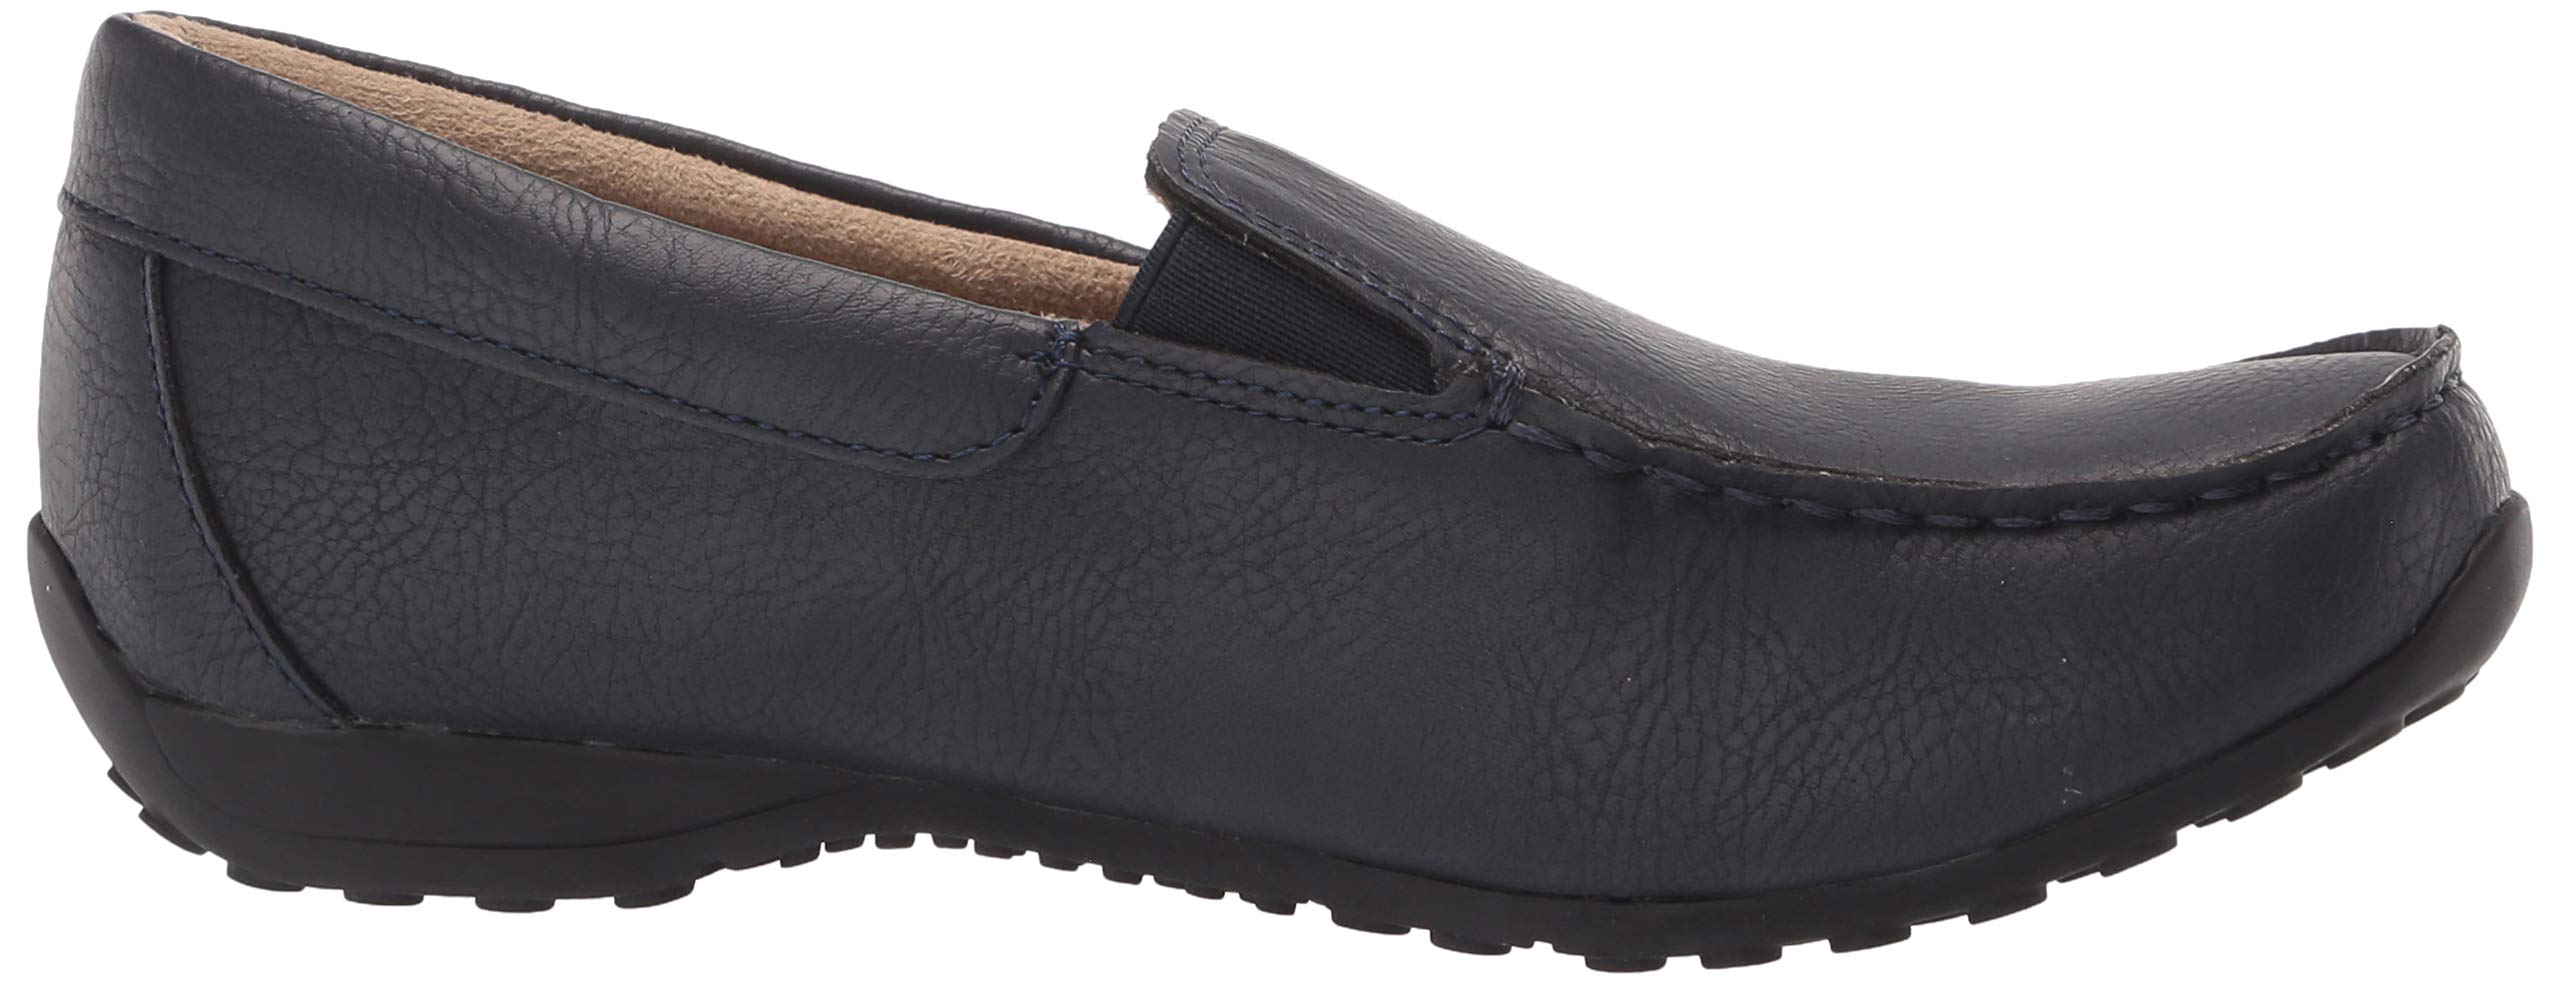 The Children's Place Boy's Slip on Loafer Shoes Ballet Flat